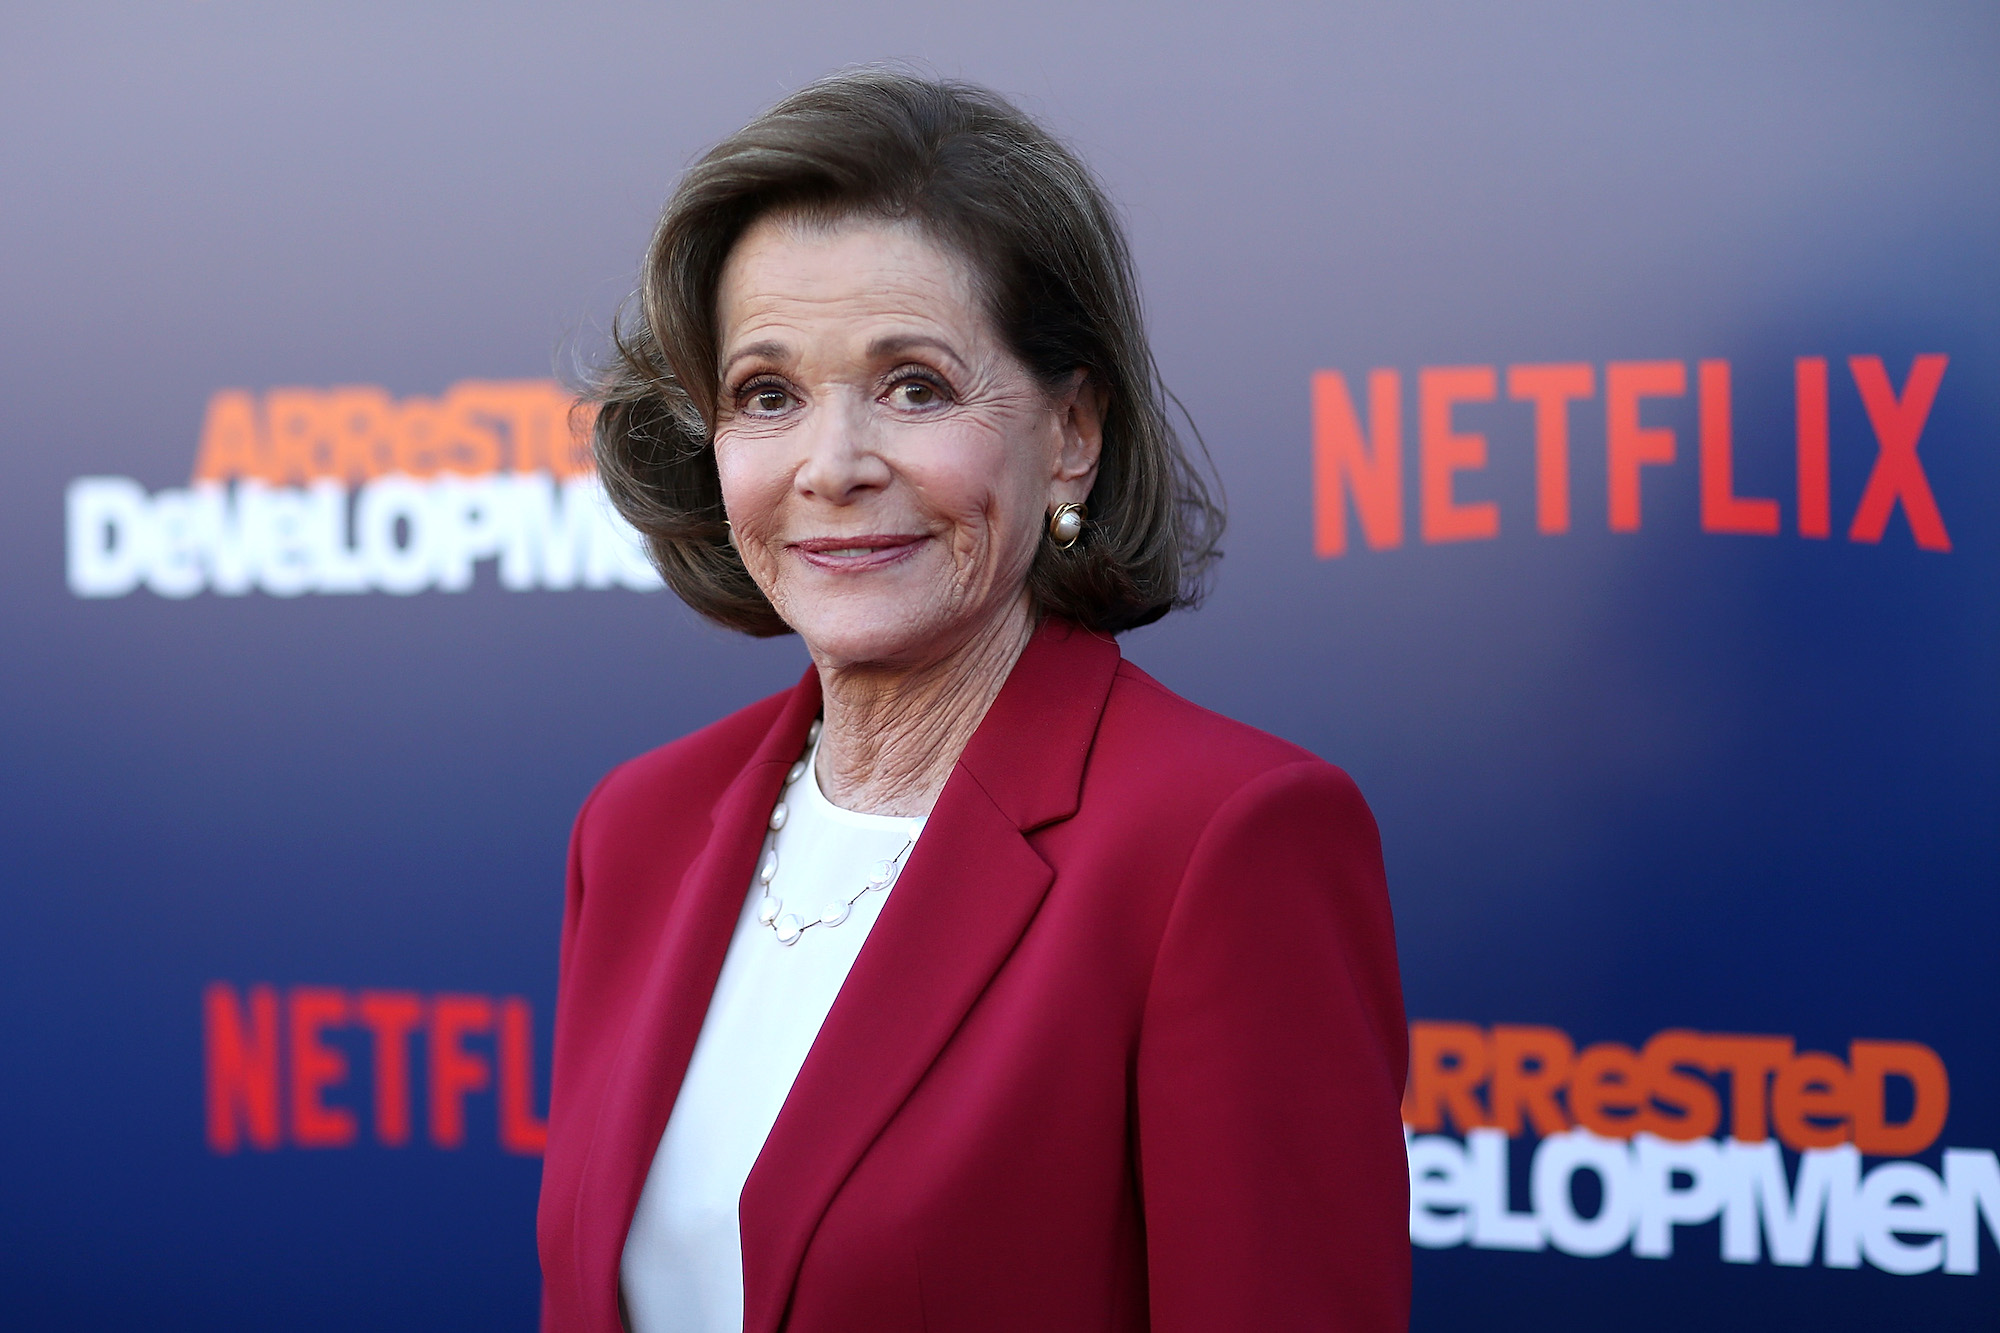 Jessica Walter smiling in front of a blue background